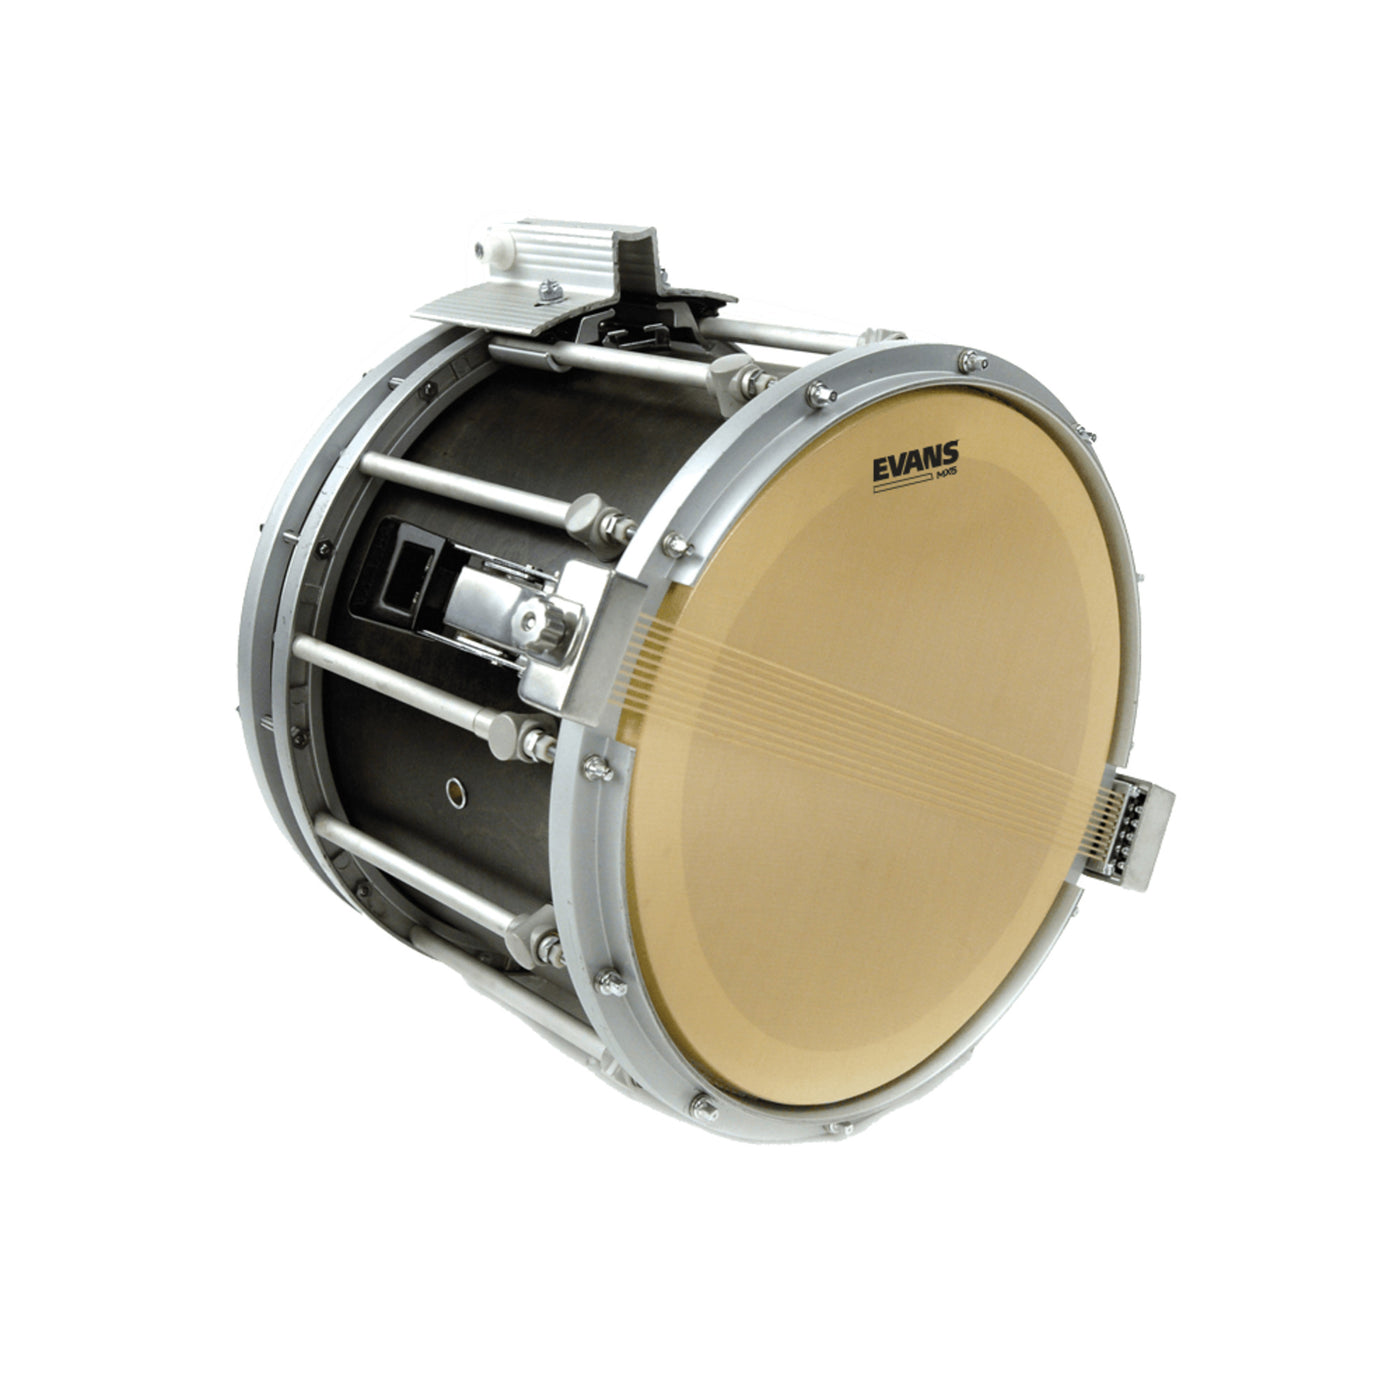 Evans MX5 Marching Snare Side Drum Head, 14 Inch